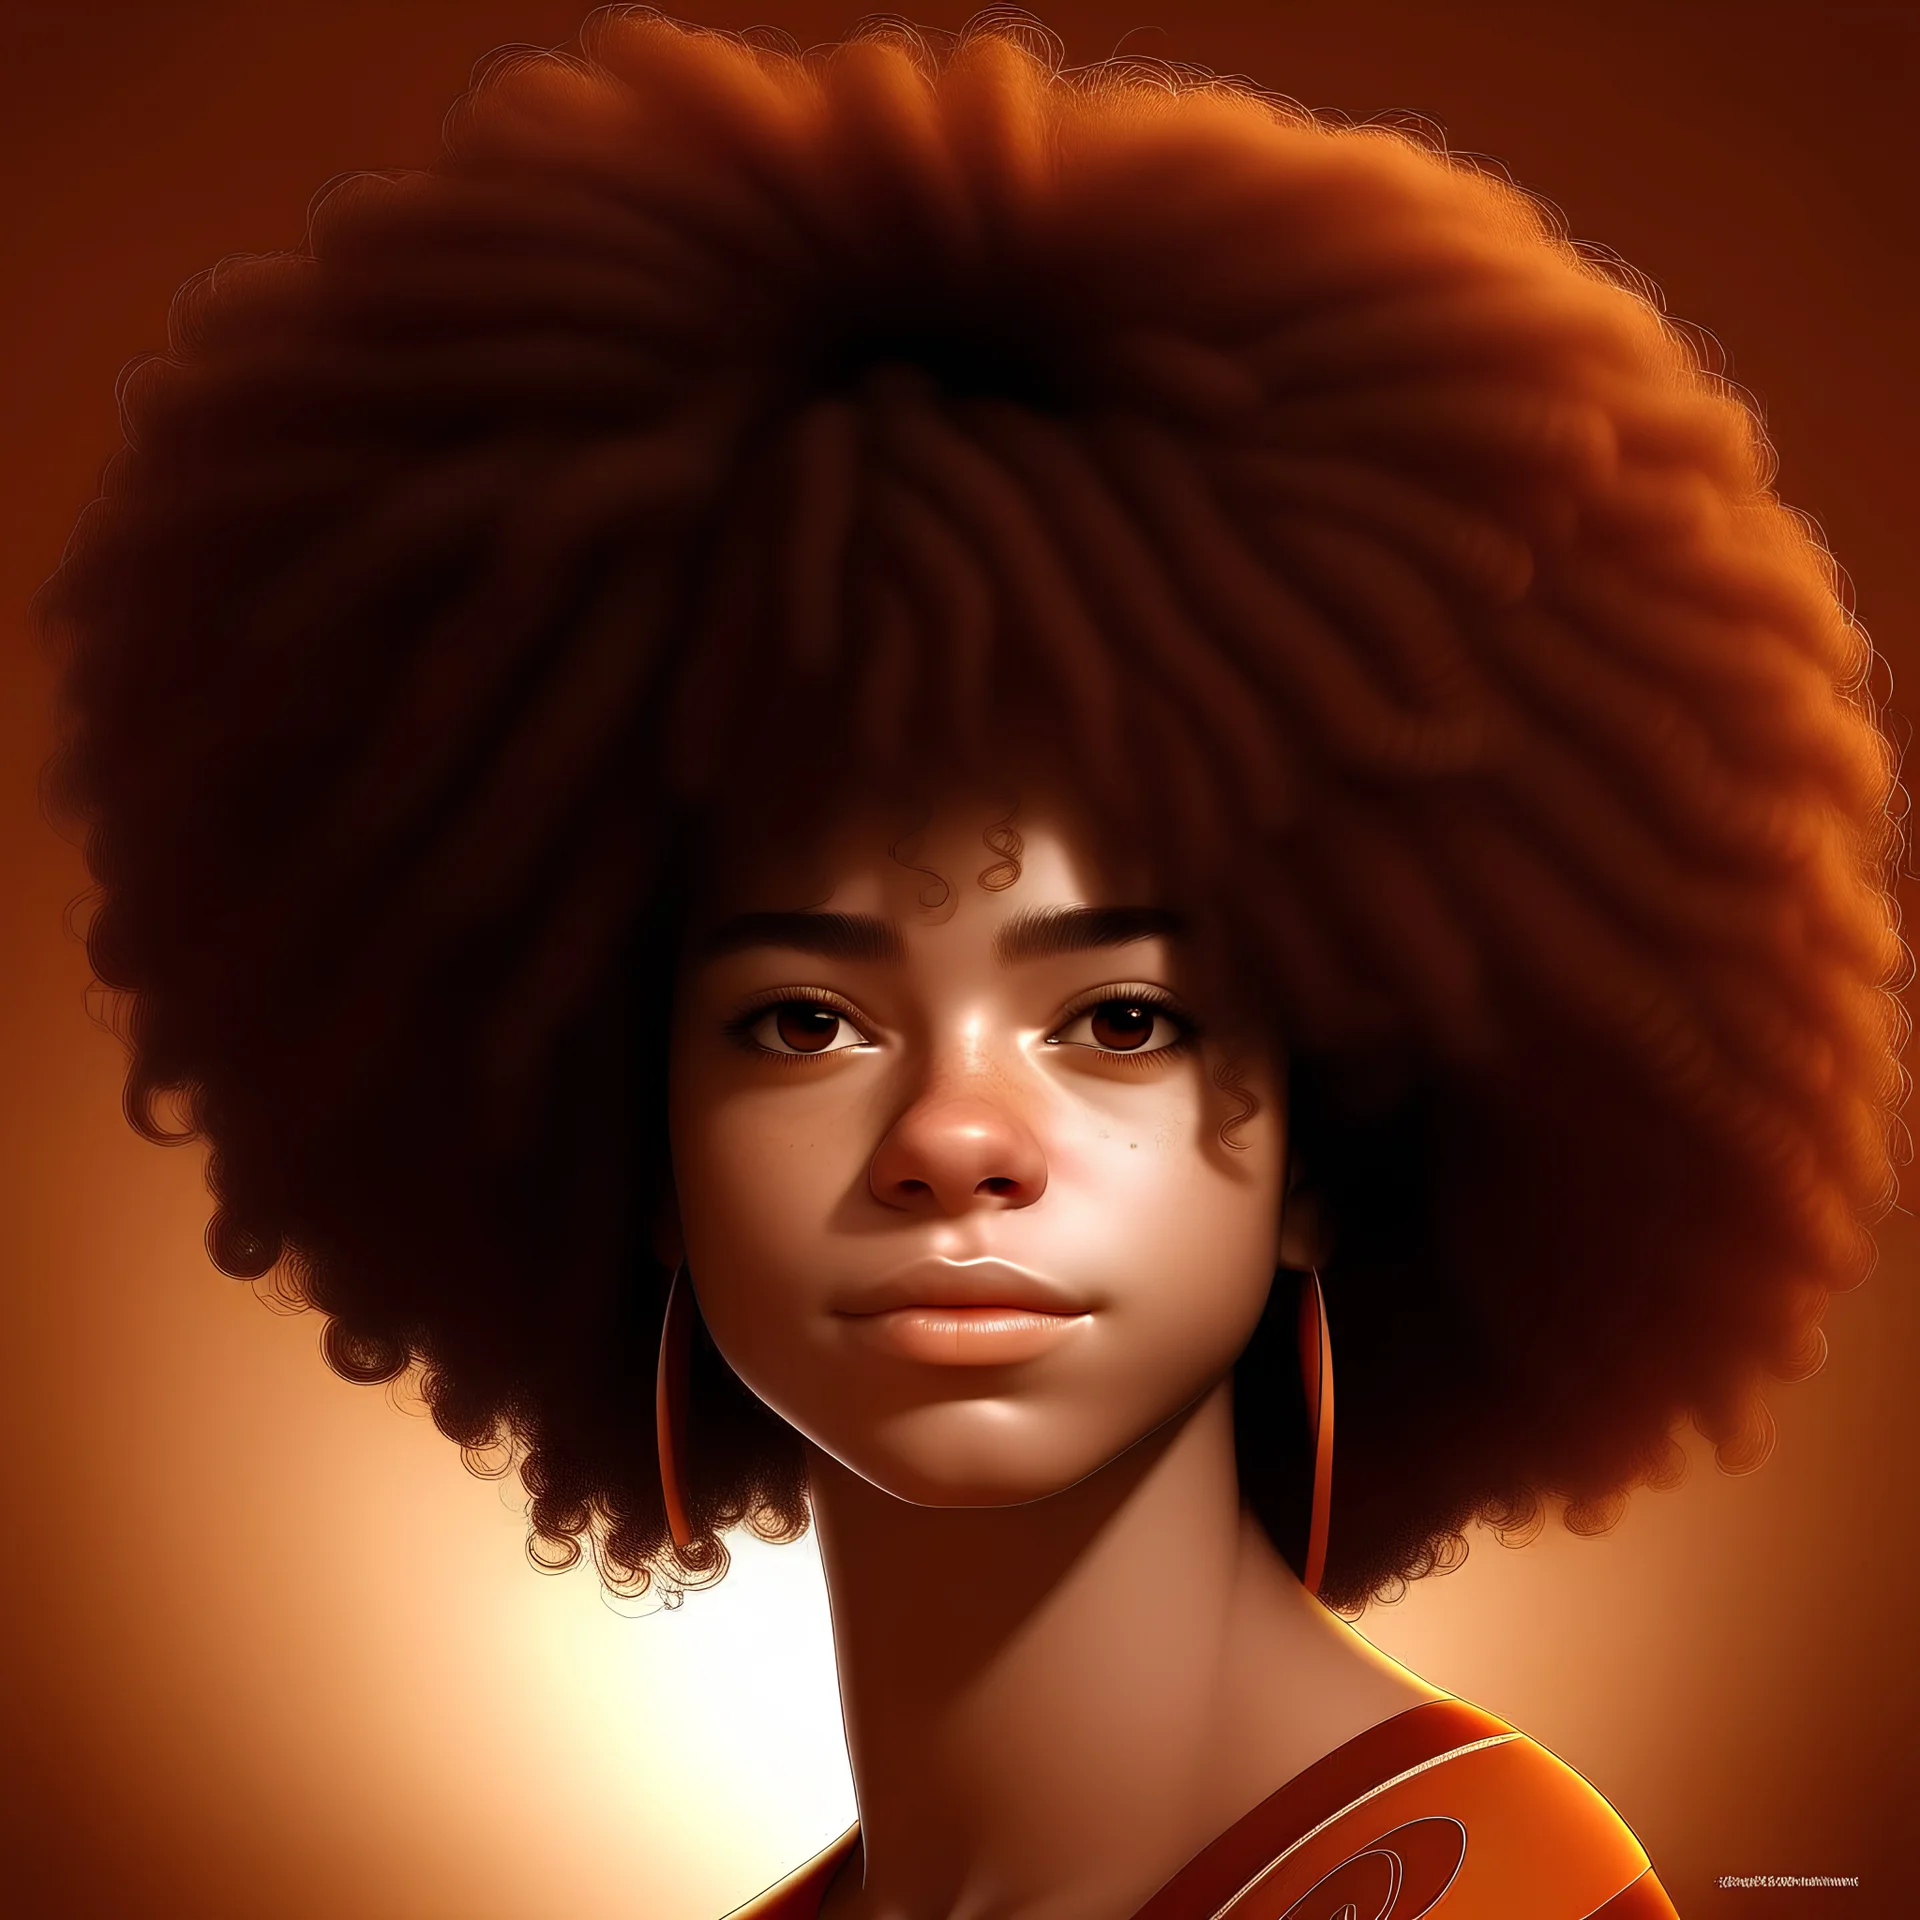 design drawing of a girl with afro hair, soft skin, curly afro, 3d art style for a product post on instagram